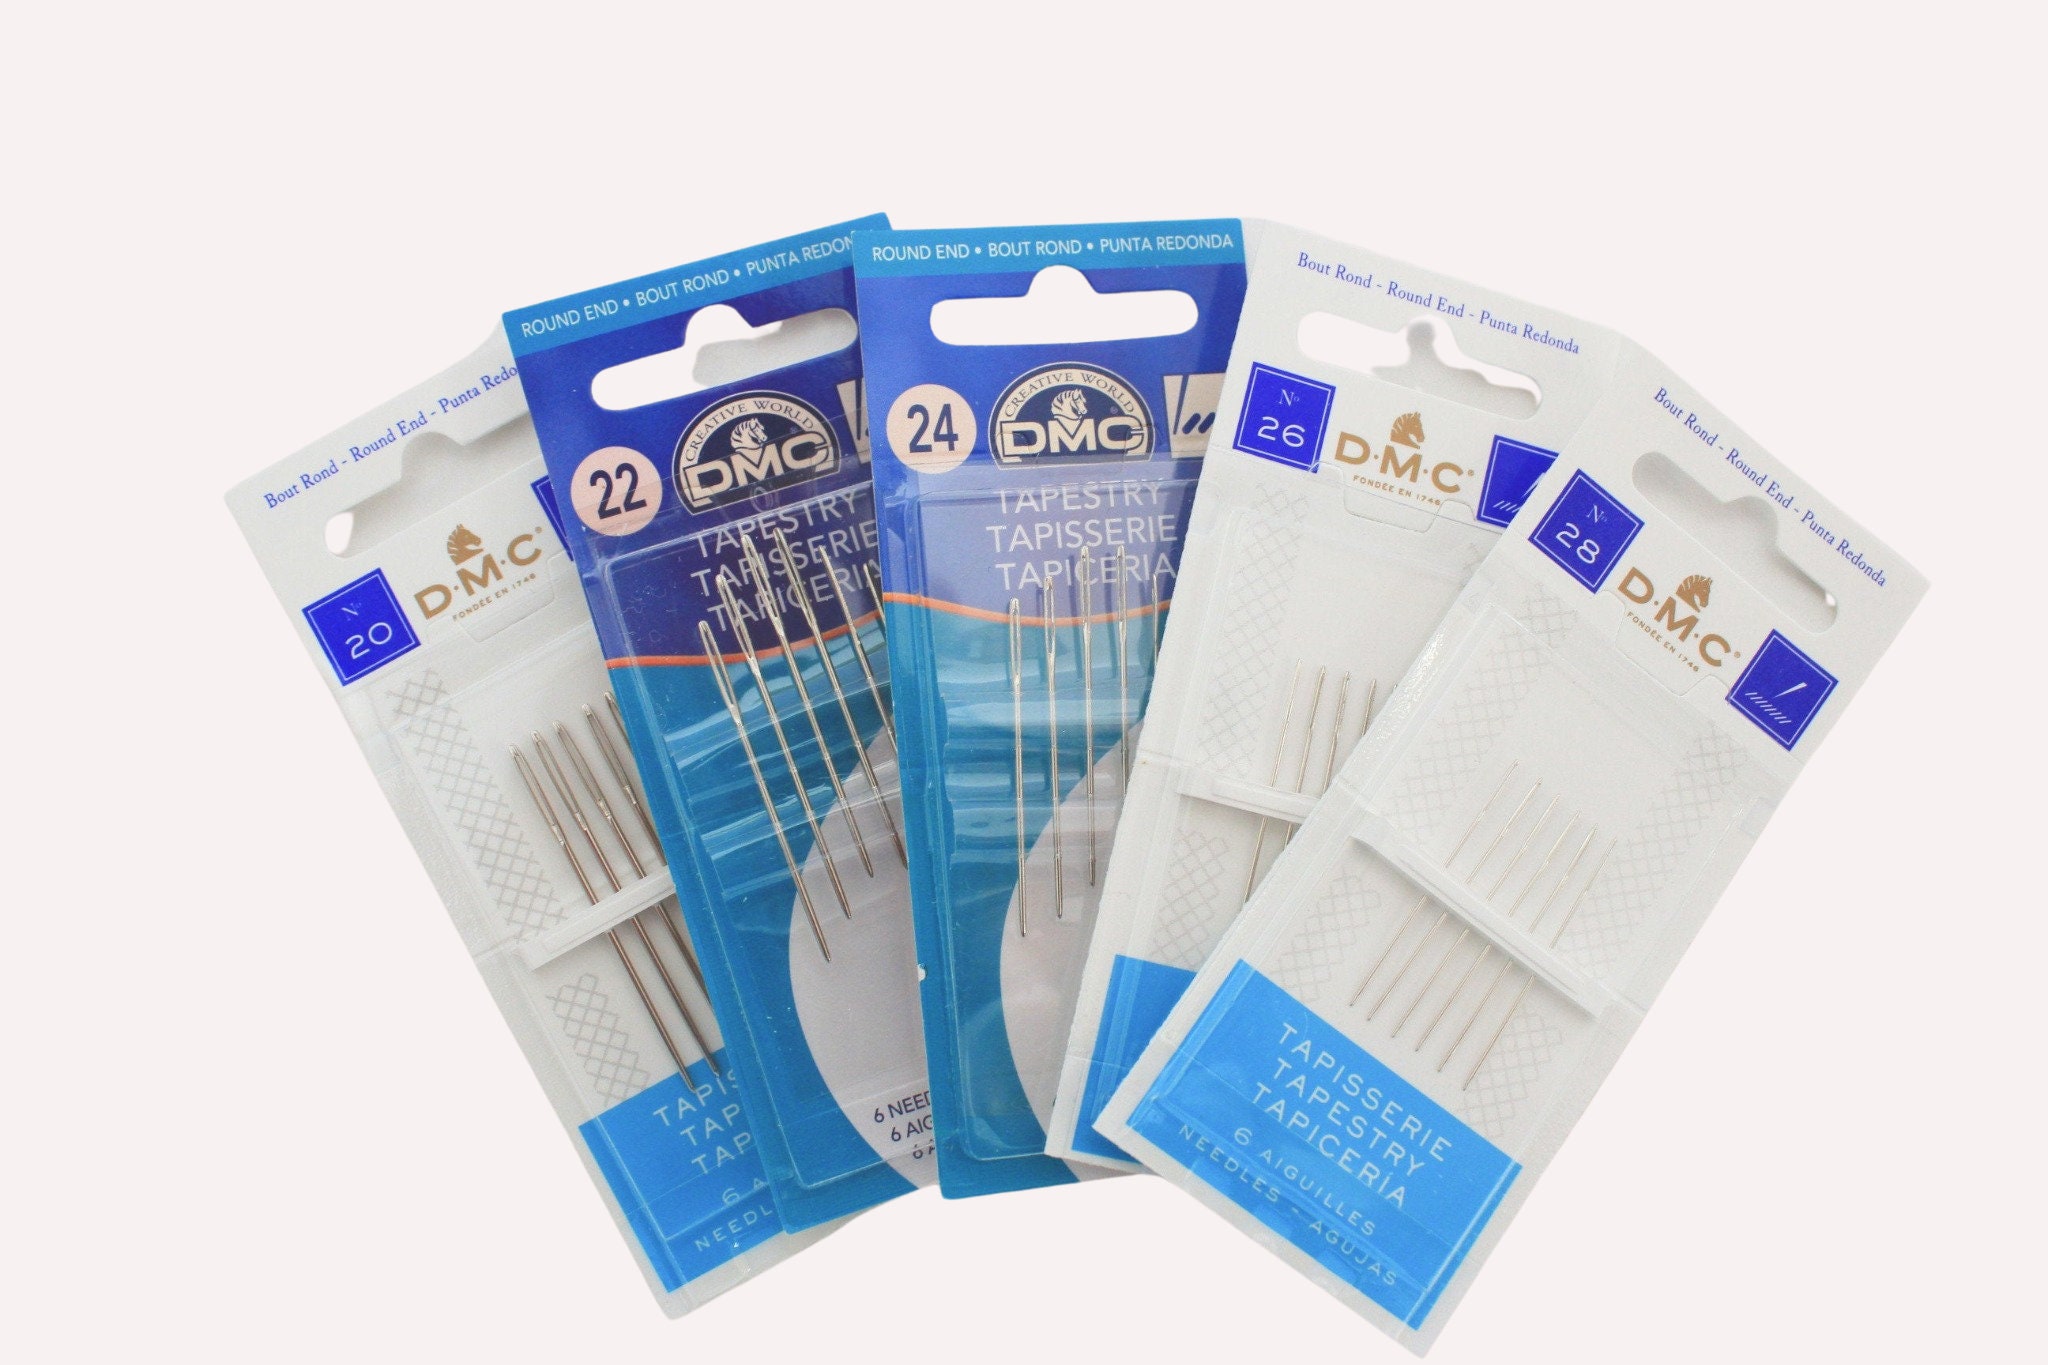 Metal Blunt Needles Pack of 6, Blunt Needles for Embroidery or